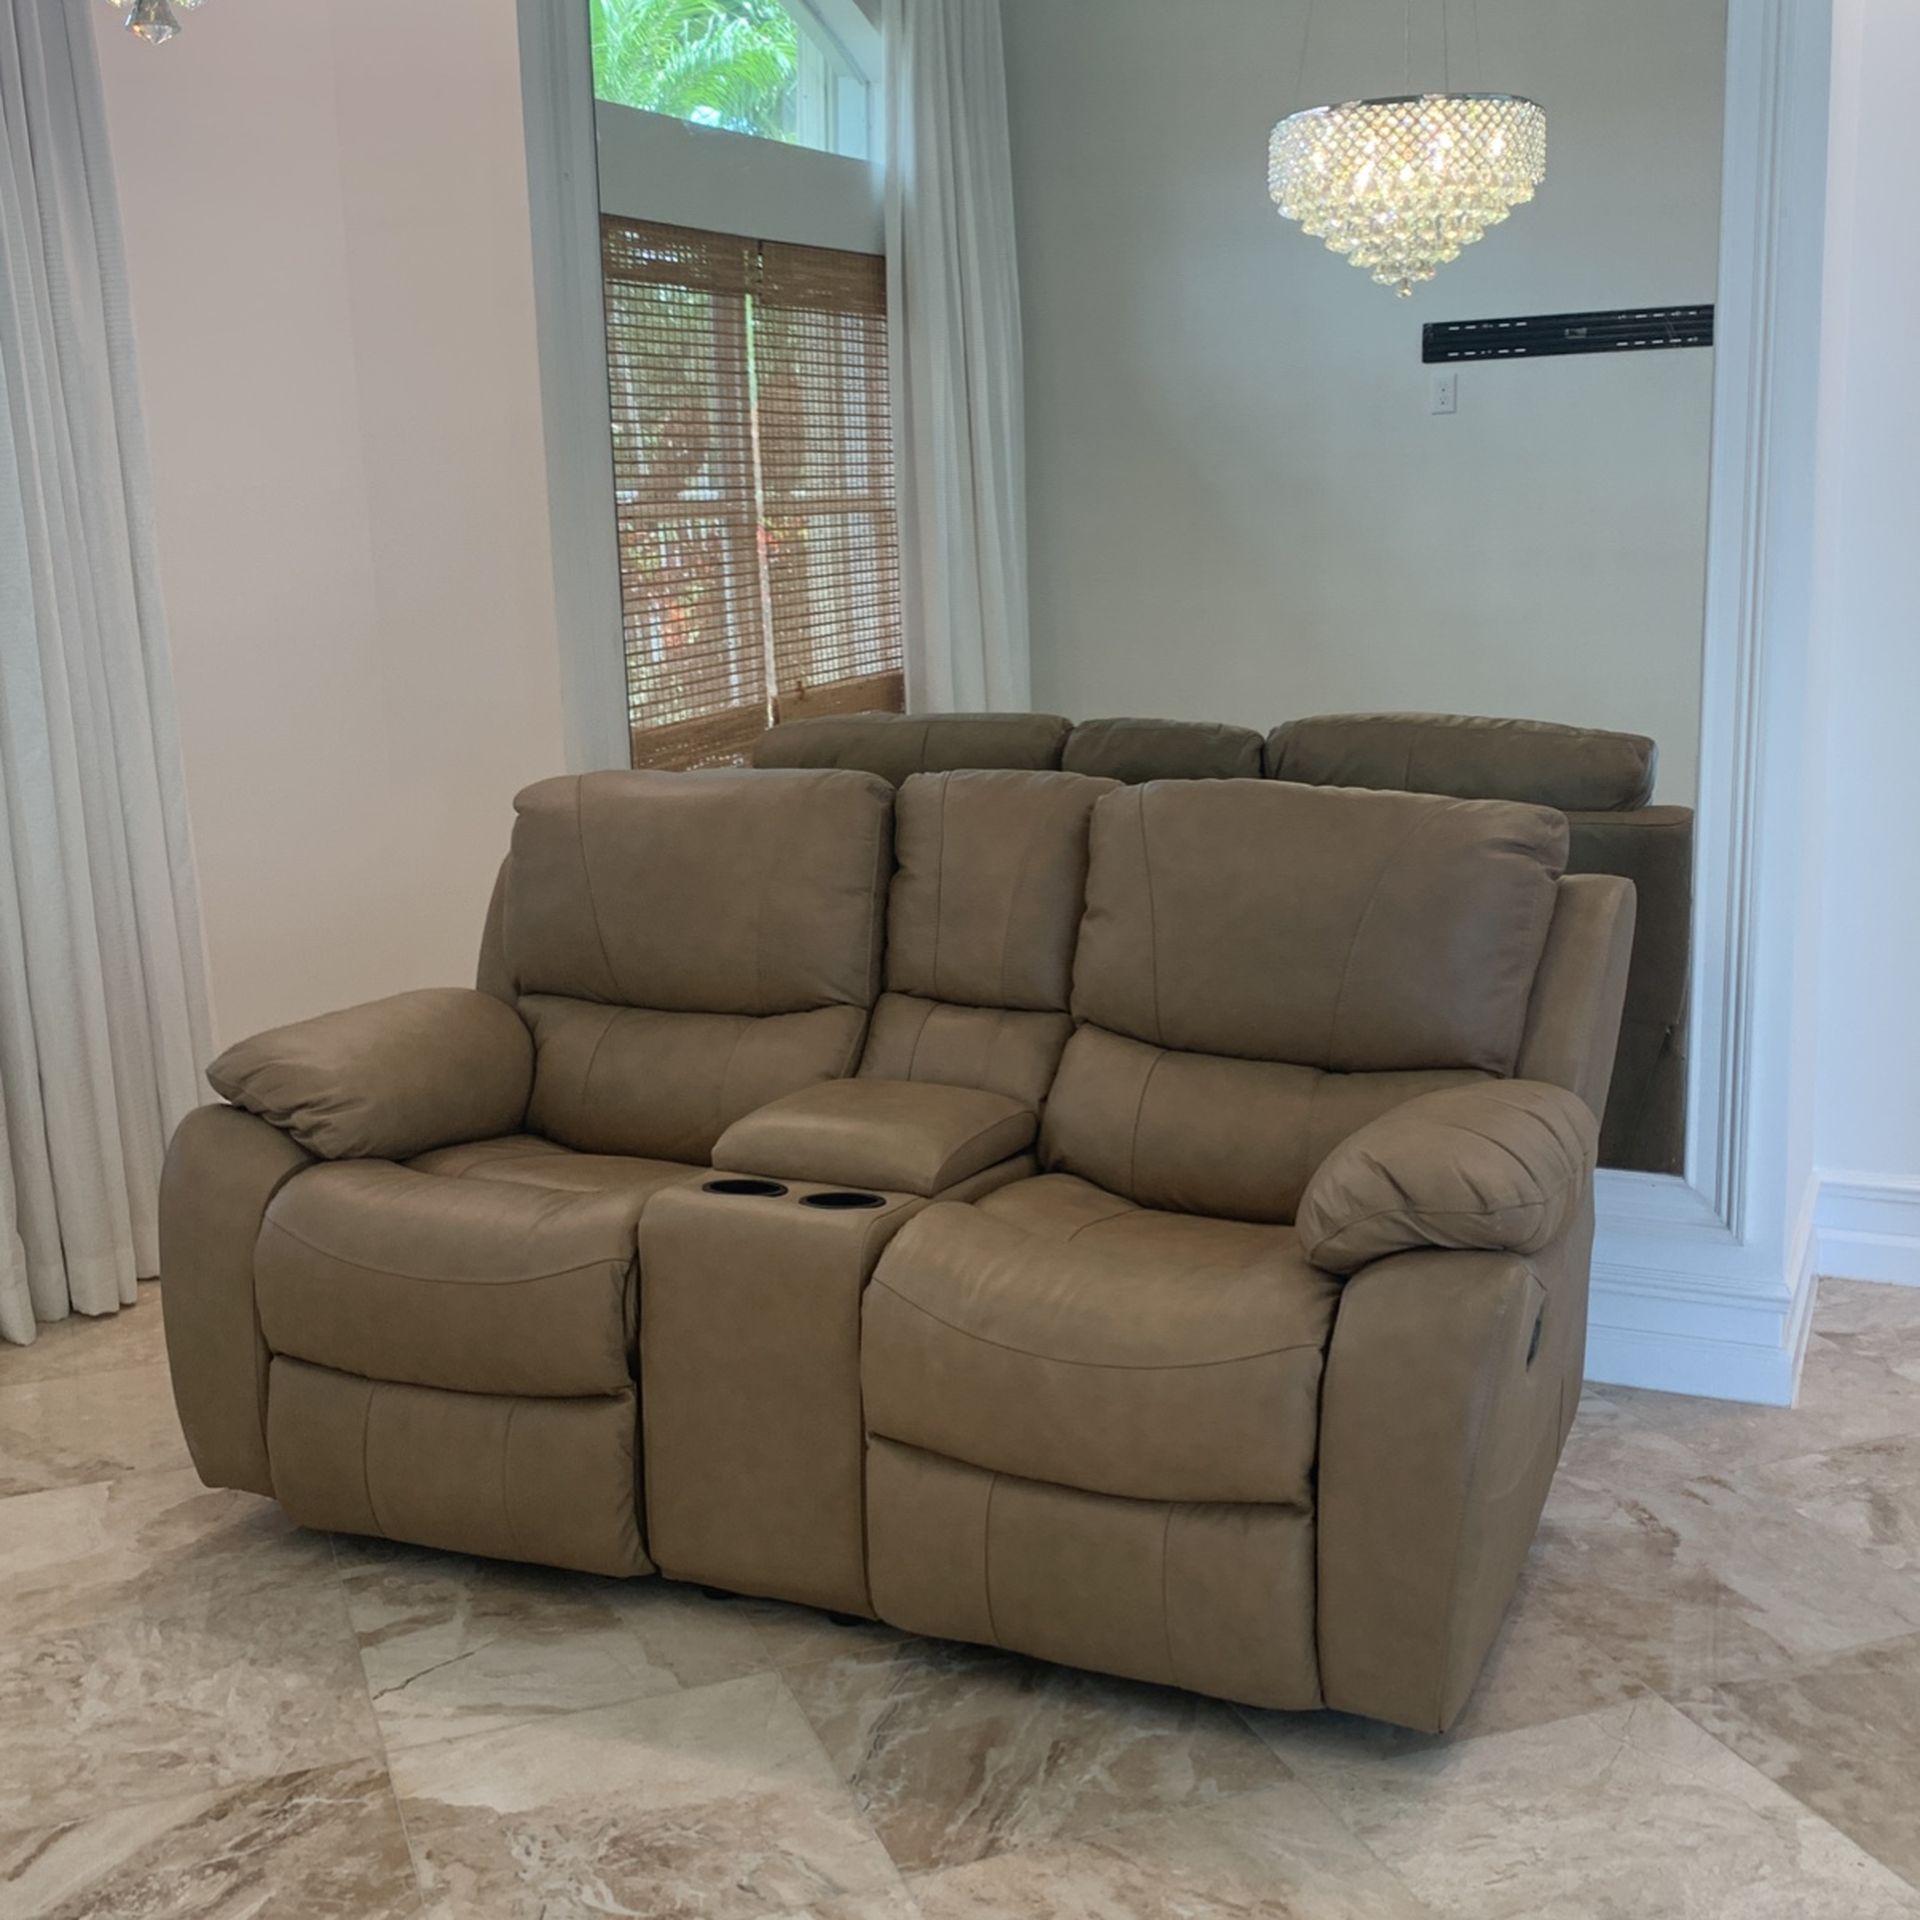 1 Taupe Leather Love Seat Recliner. $250.00 